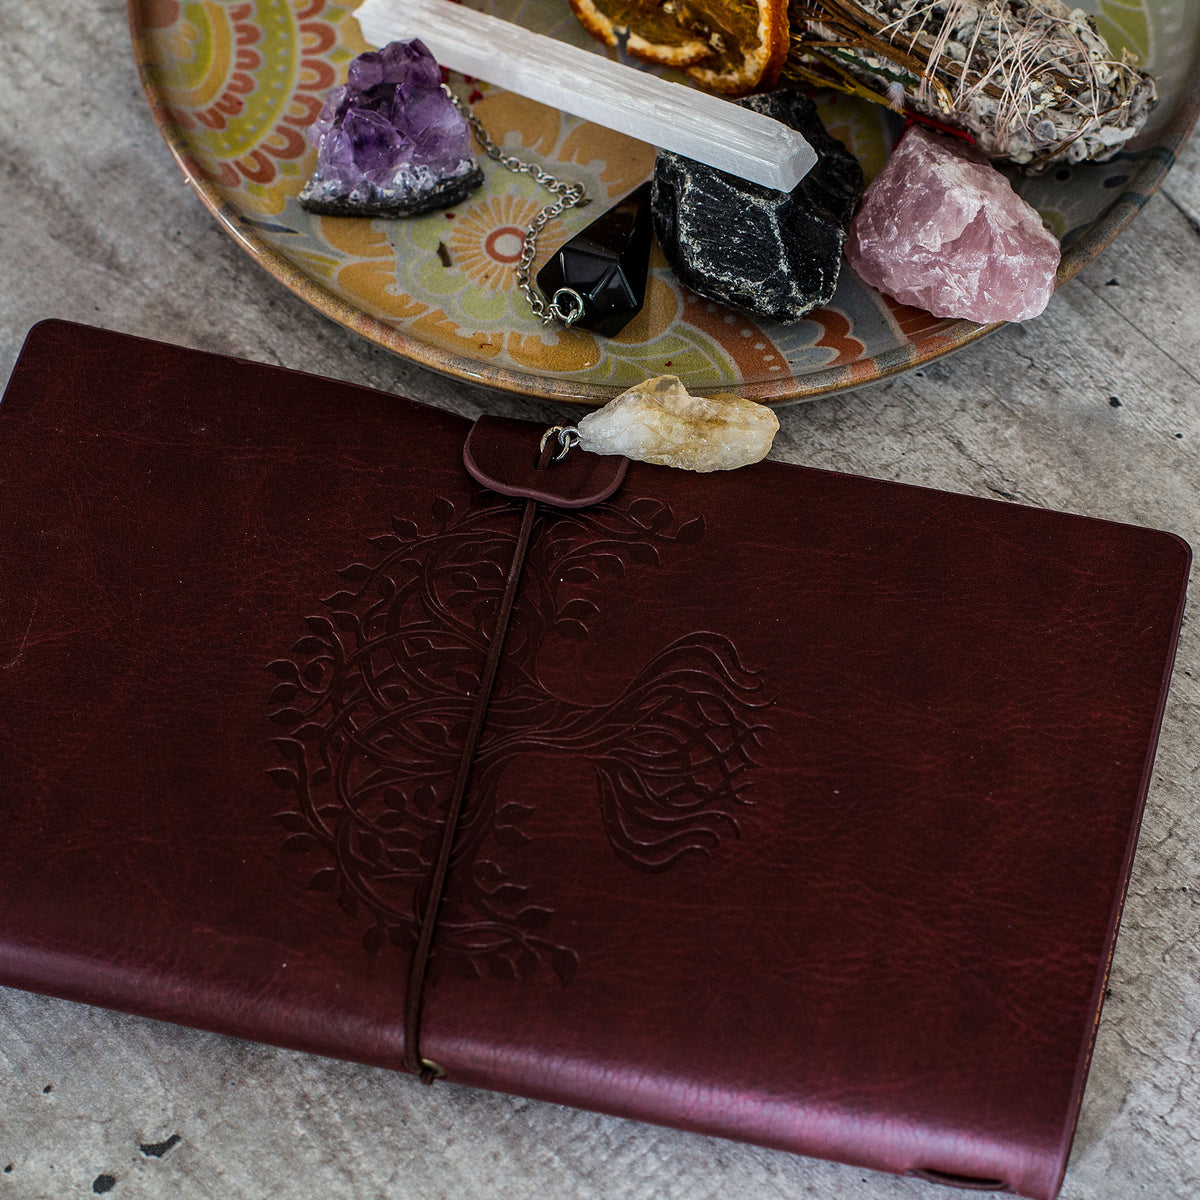 Manifestation Journal - Tree of Life (Red Leather) - Capture your thoughts and ambitions in this elegant leather journal complete with an elastic band and a hanging crystal to manifest your ideal life.